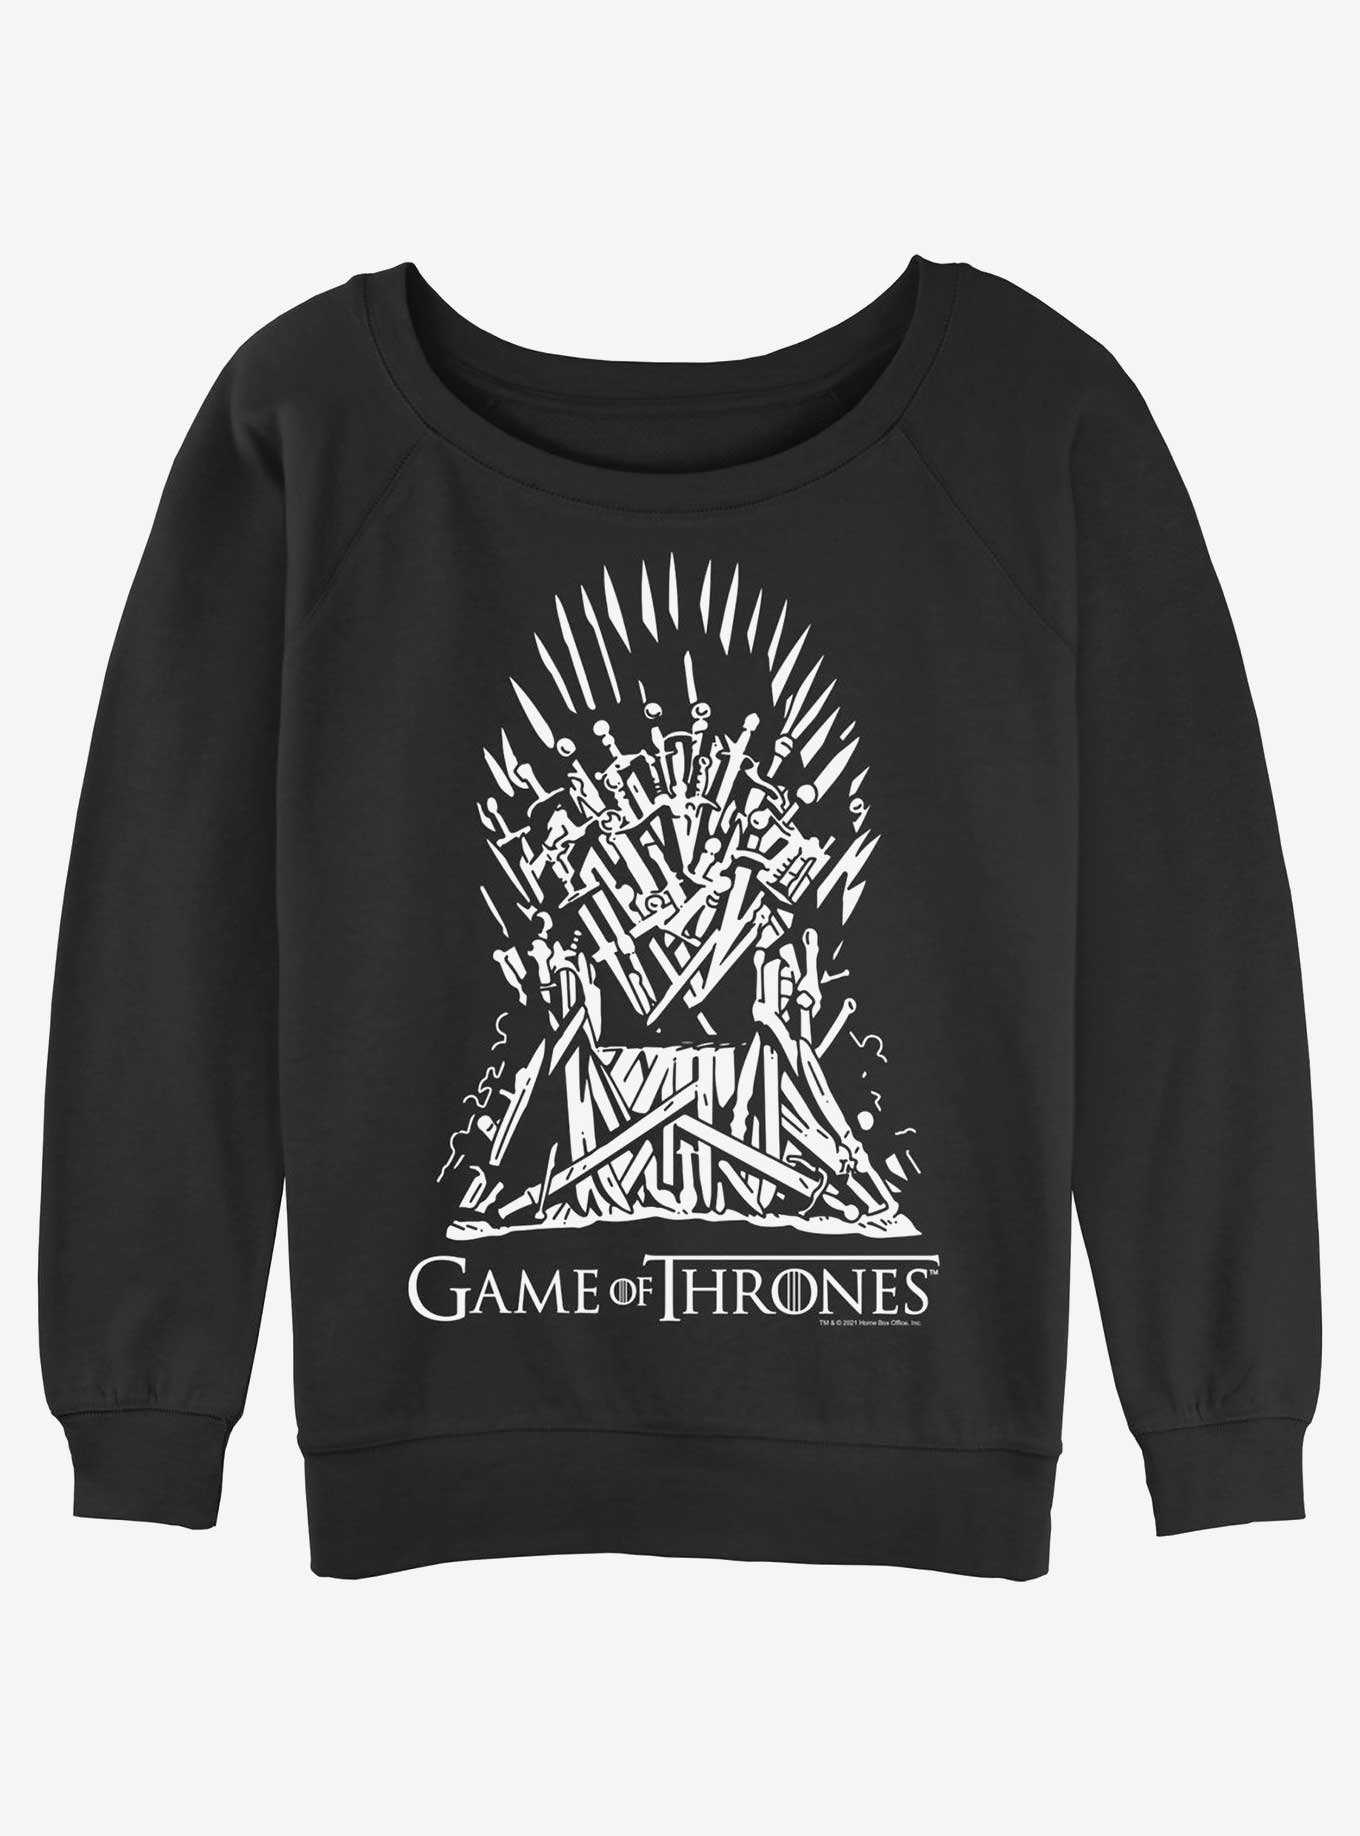 OFFICIAL Game Of Thrones T-Shirts Hot Topic Merchandise & 